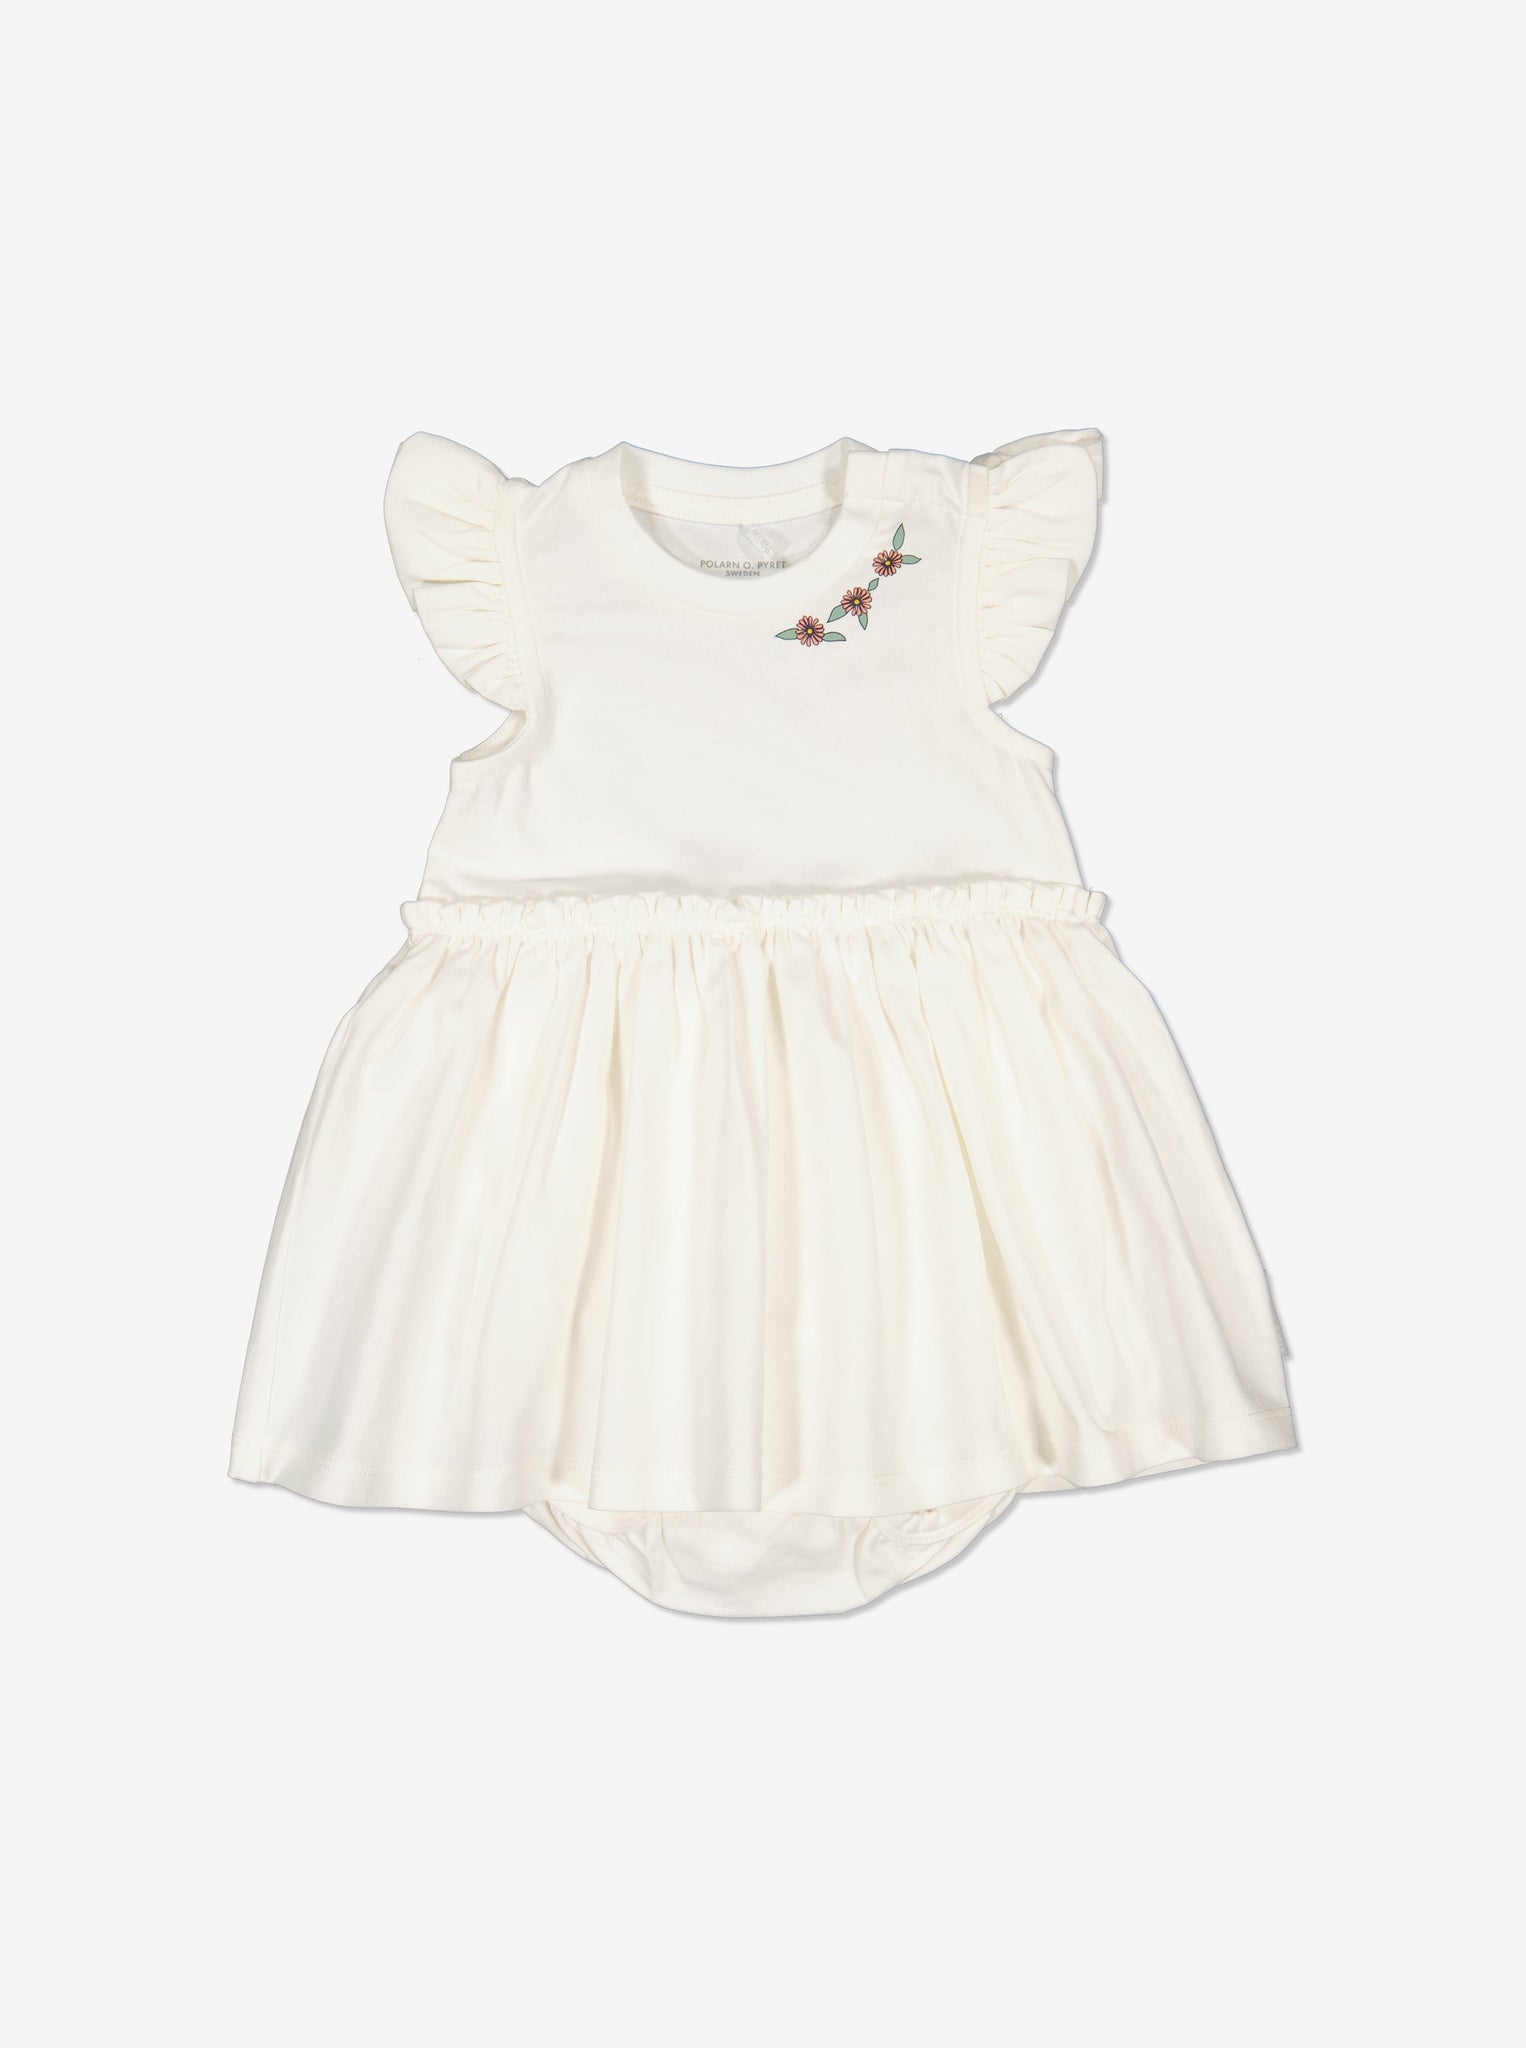 Floral Print White Babygrow Dress from Polarn O. Pyret Kidswear. Ethically made and sustainably sourced materials.